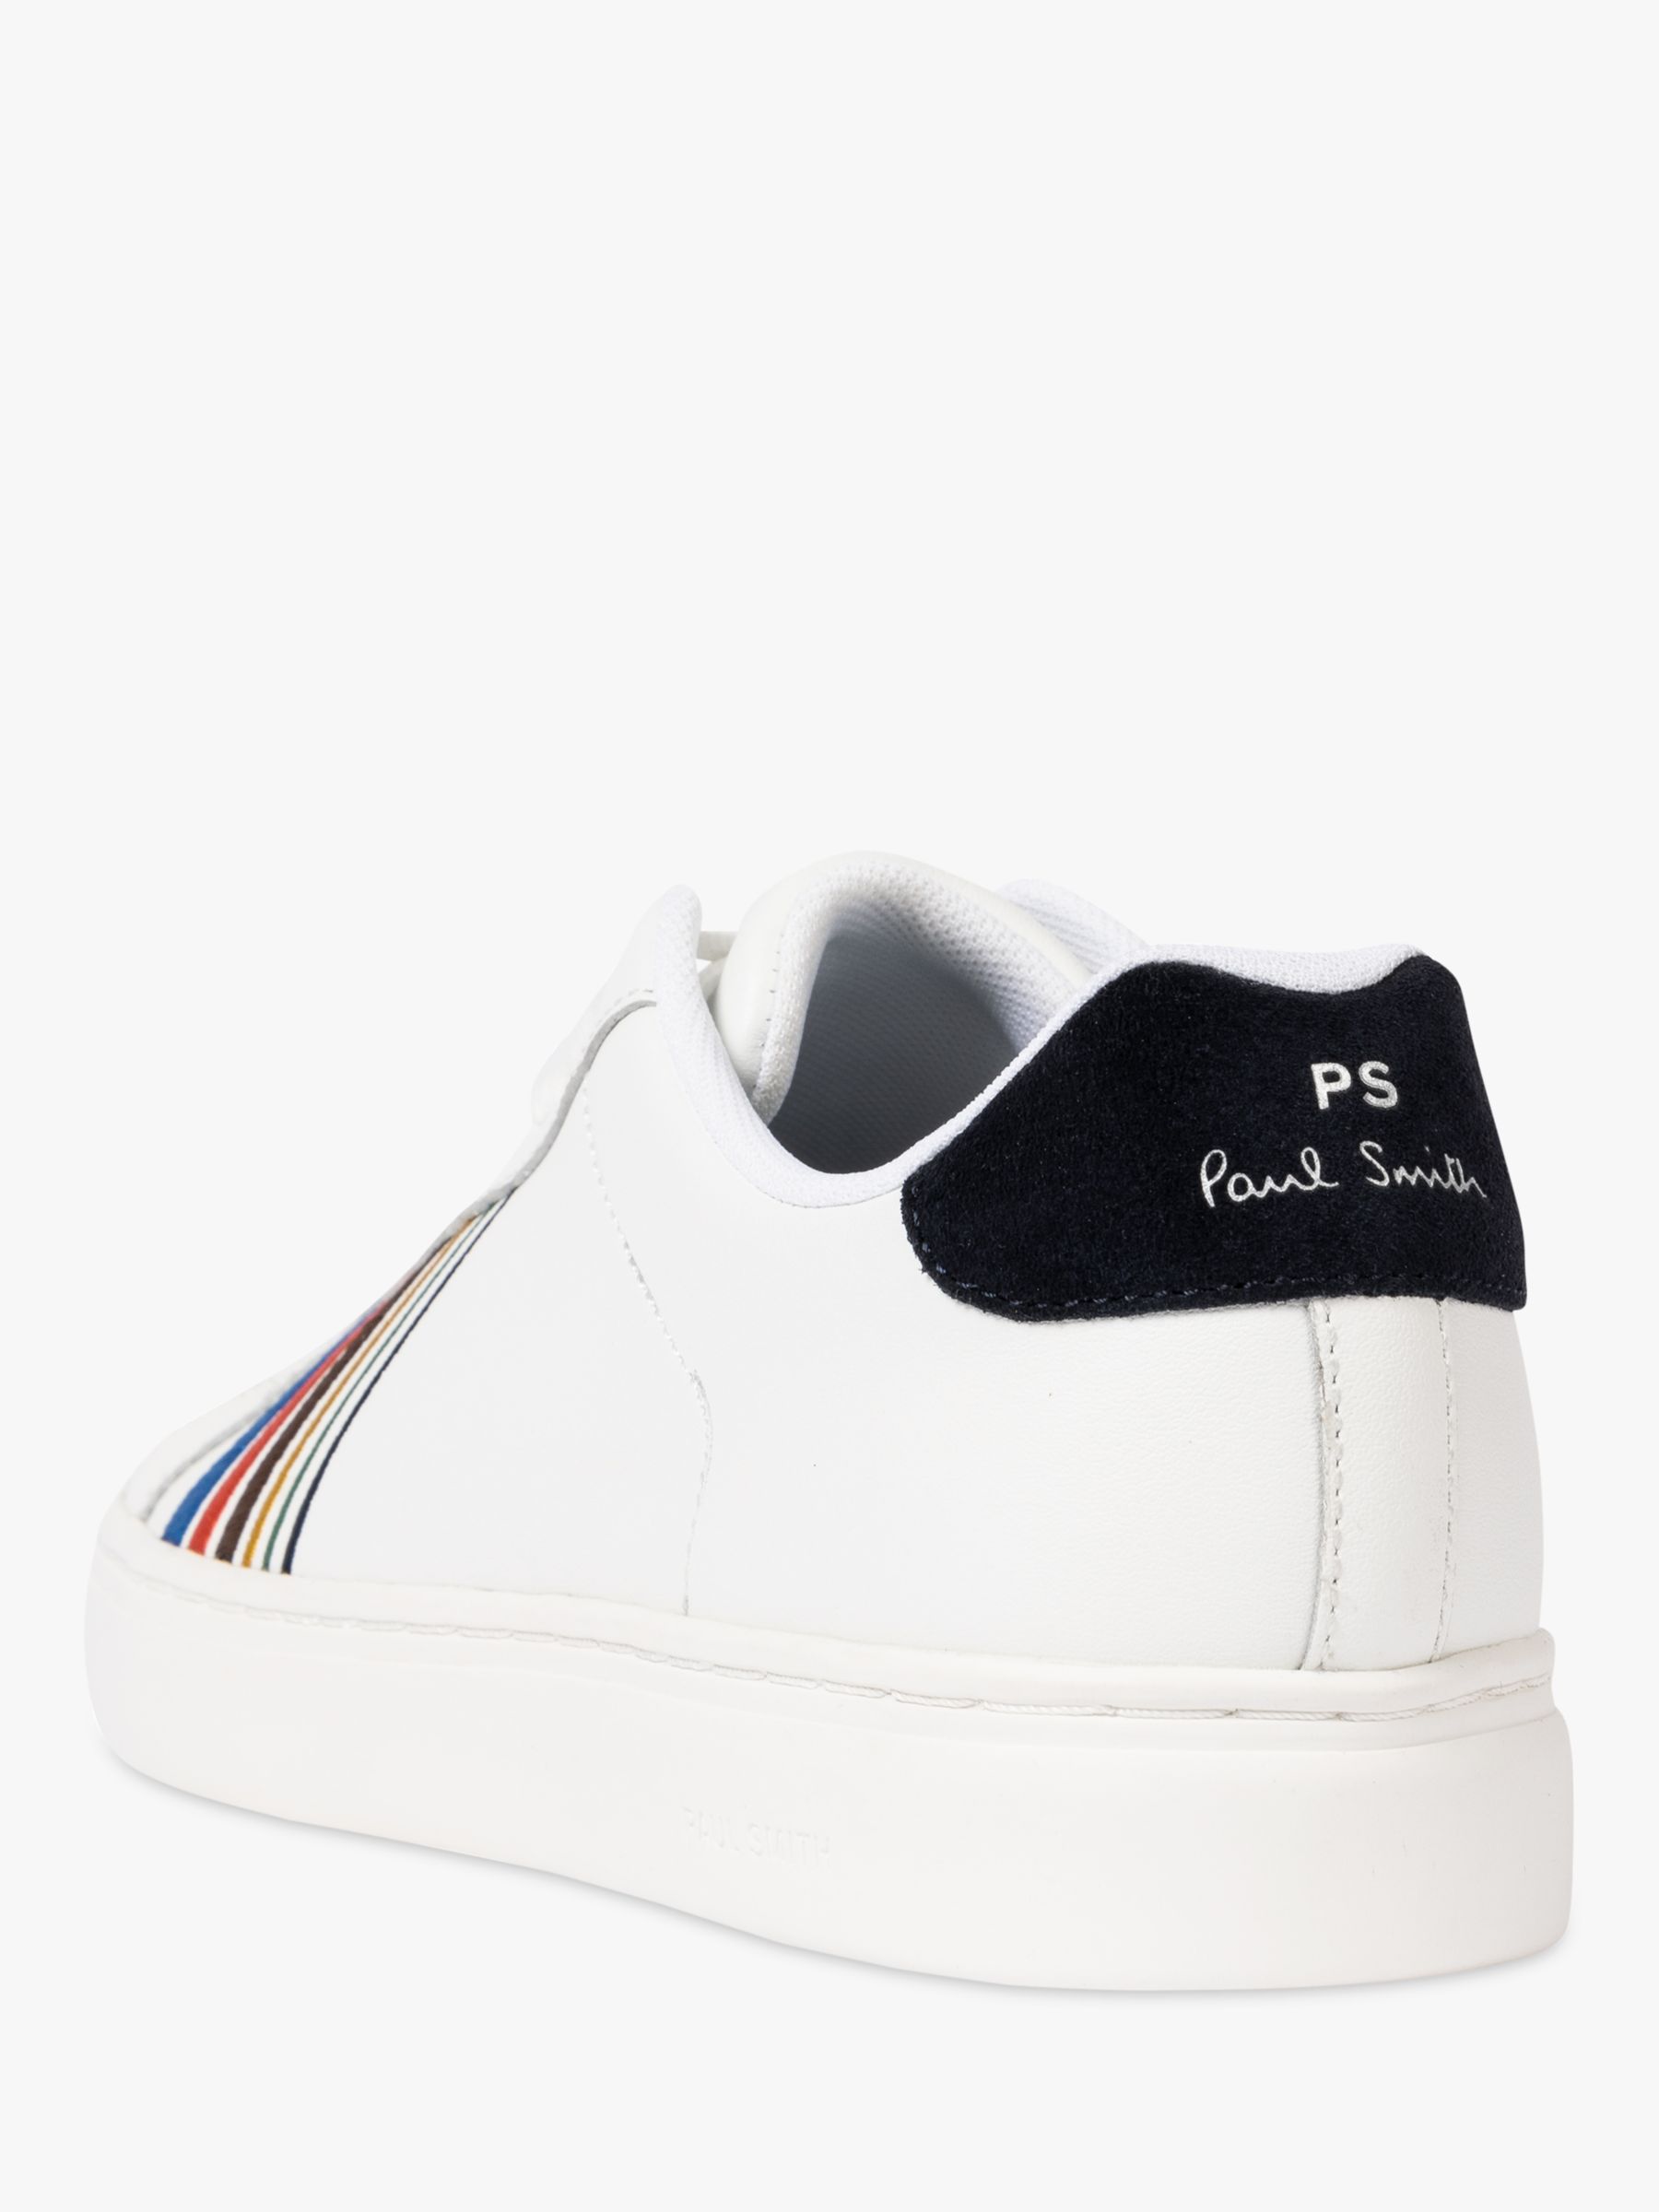 Paul Smith Rex Embroidery Shoes, White/Multi, 7